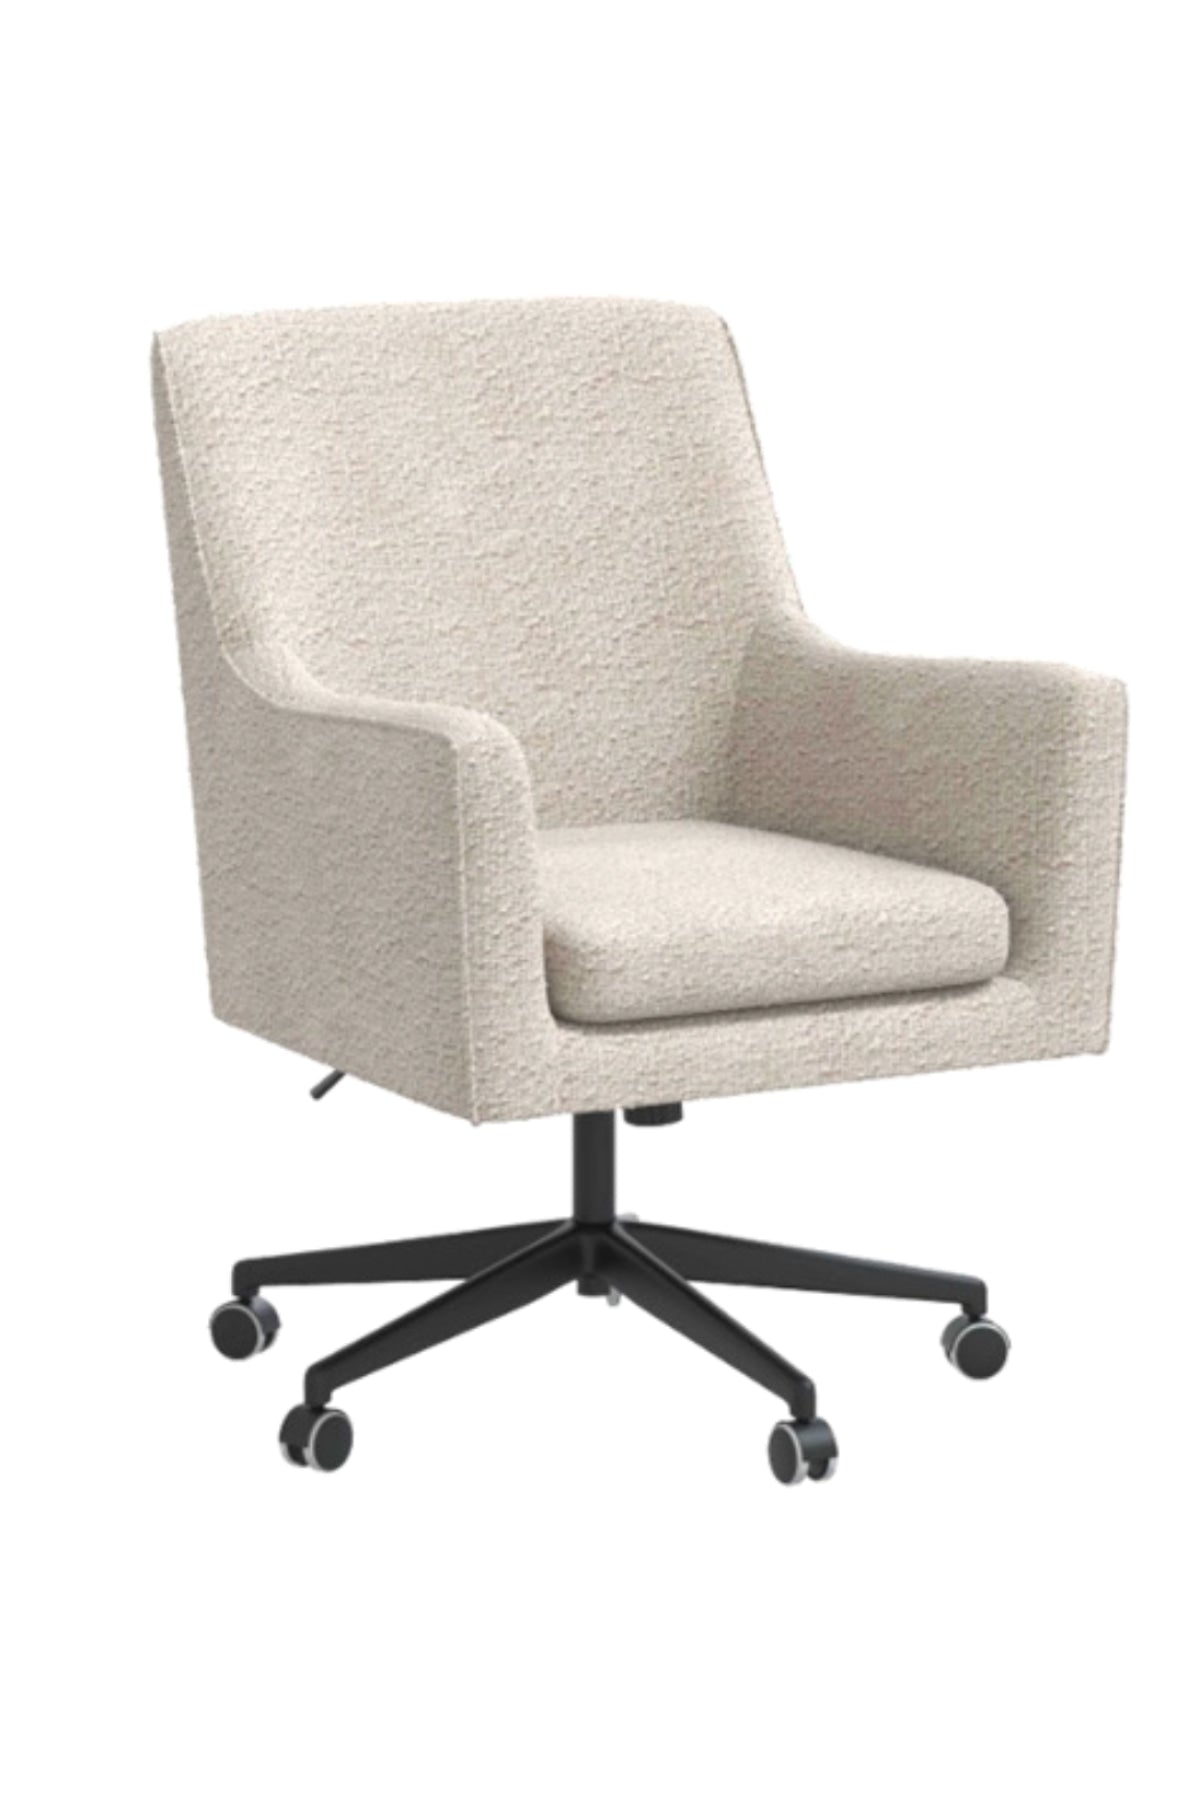 Lund Office Chair - Open Box